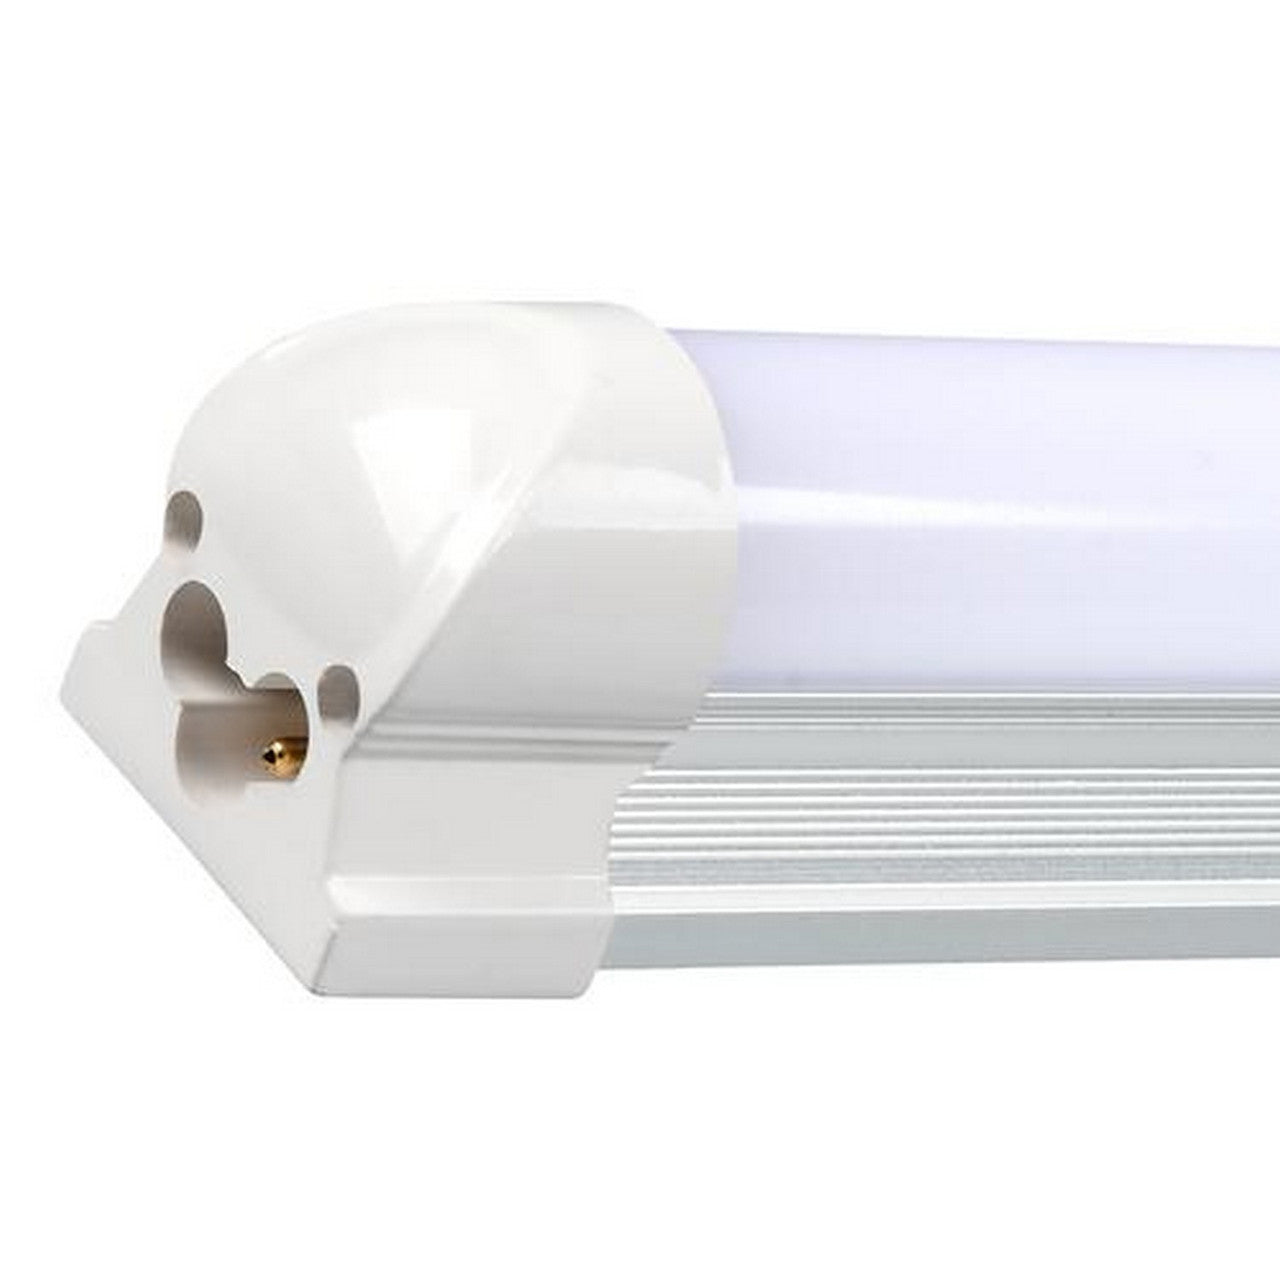 T8 Integrated 8ft LED Shop Lights - 60W, 5000K, 7200 Lumens, Frosted Linkable Fixture, Suitable for 100V-277V, ETL and DLC Listed, Traic Dimmable - Eco LED Lightings 